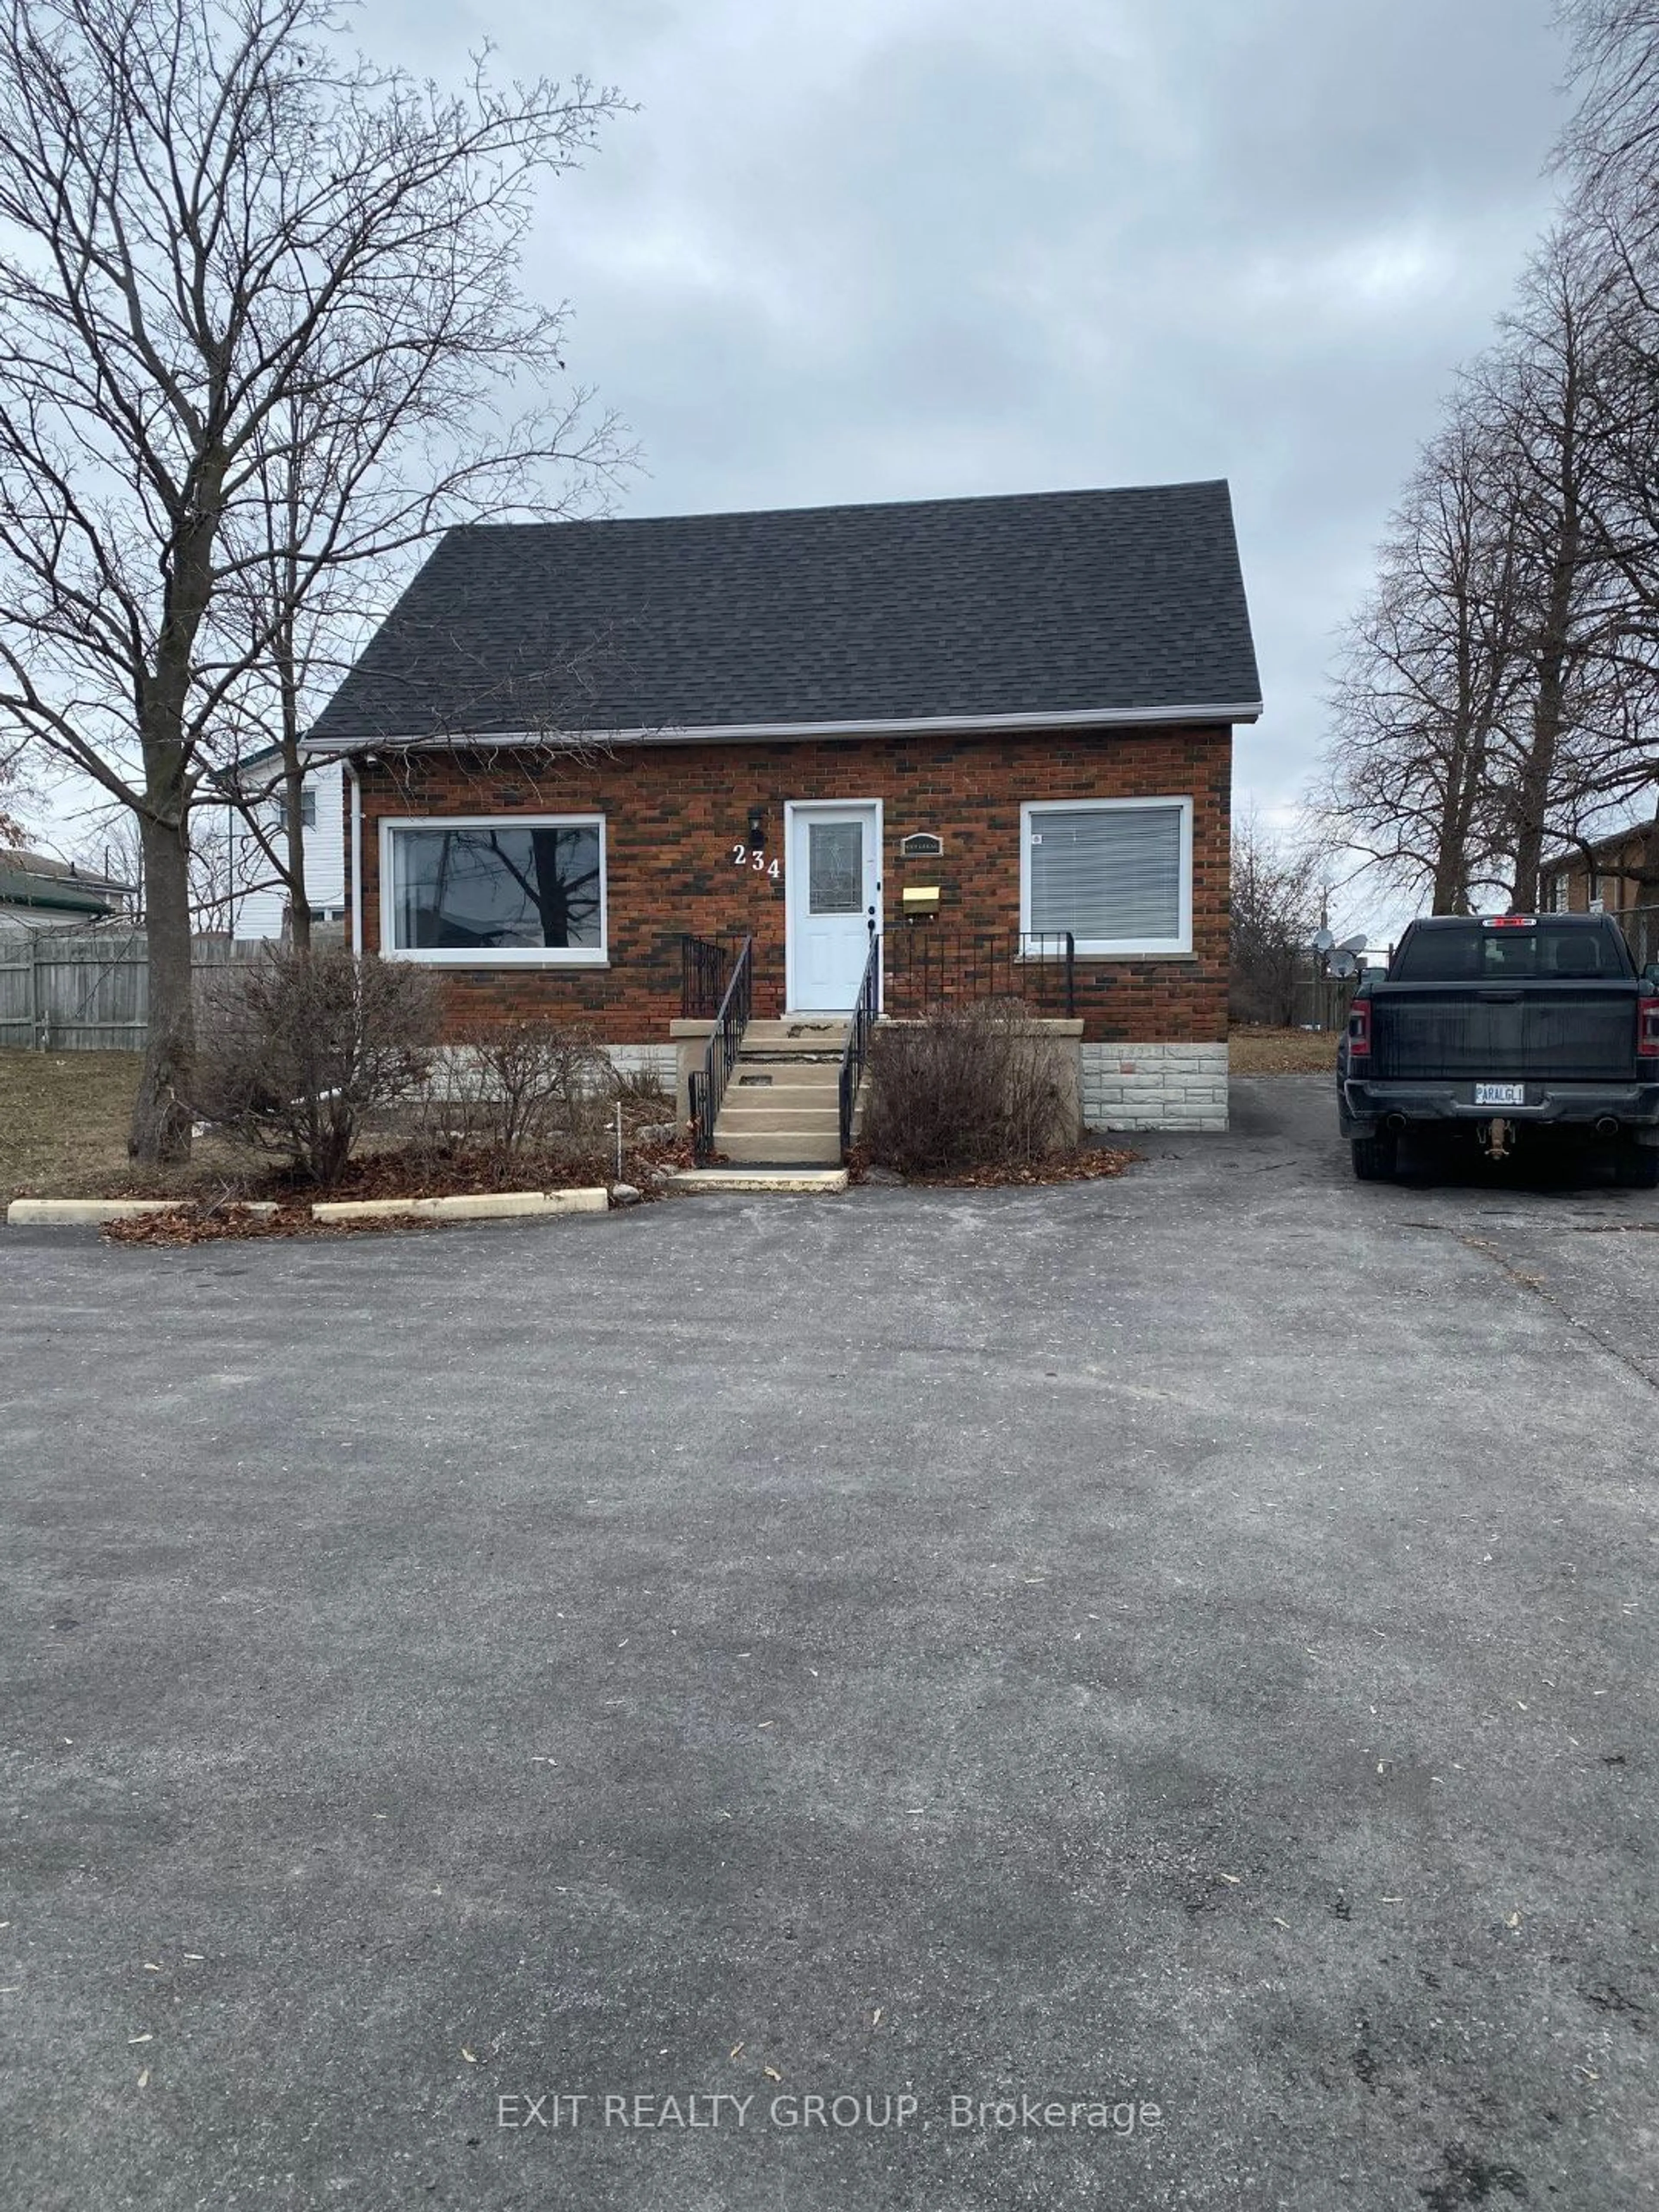 Outside view for 234 Dundas St, Quinte West Ontario K8V 1L9